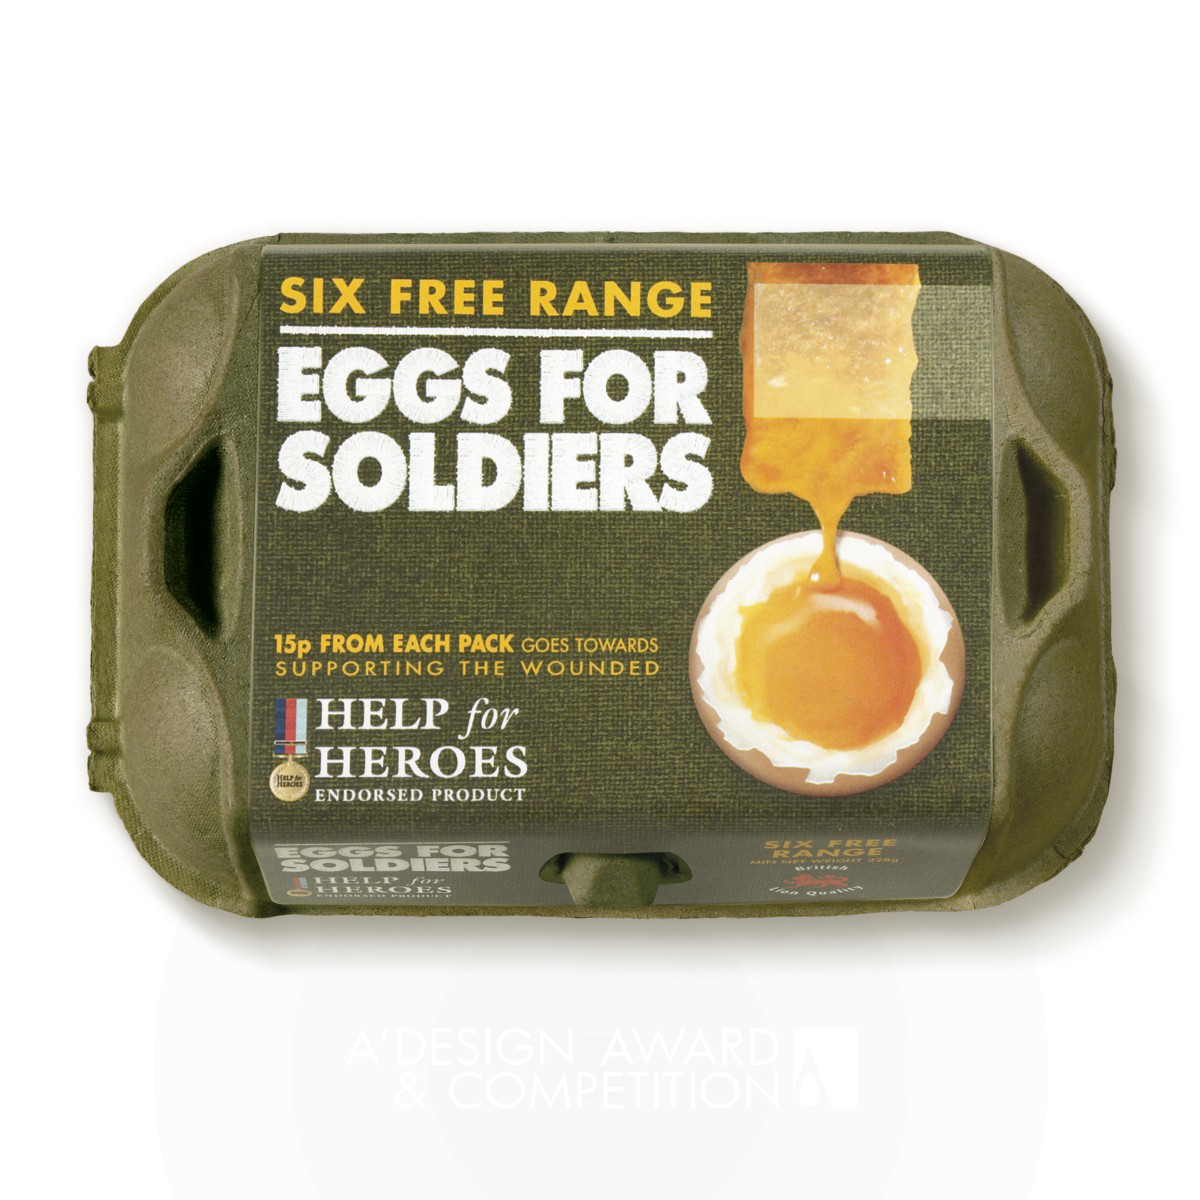 Eggs for Soldiers